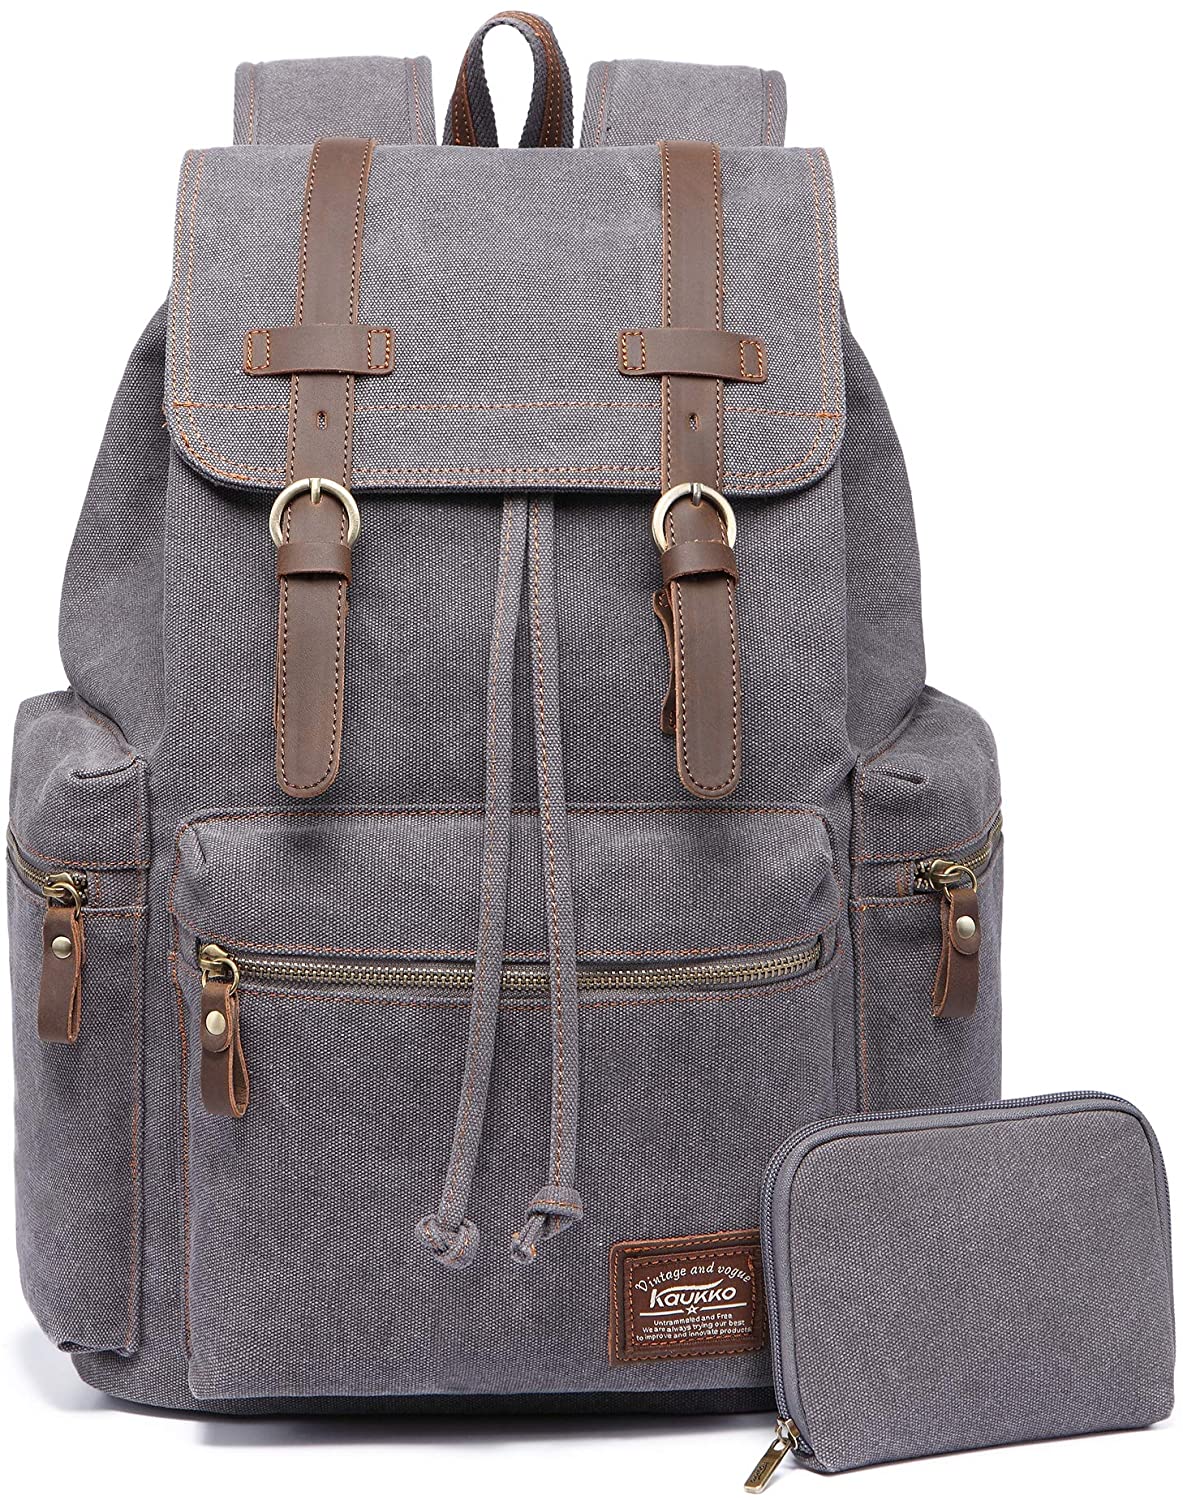 vintage canvas Backpacks Men And Women Bags Travel Students Casual For Hiking Travel Camping Backpack Mochila Masculina